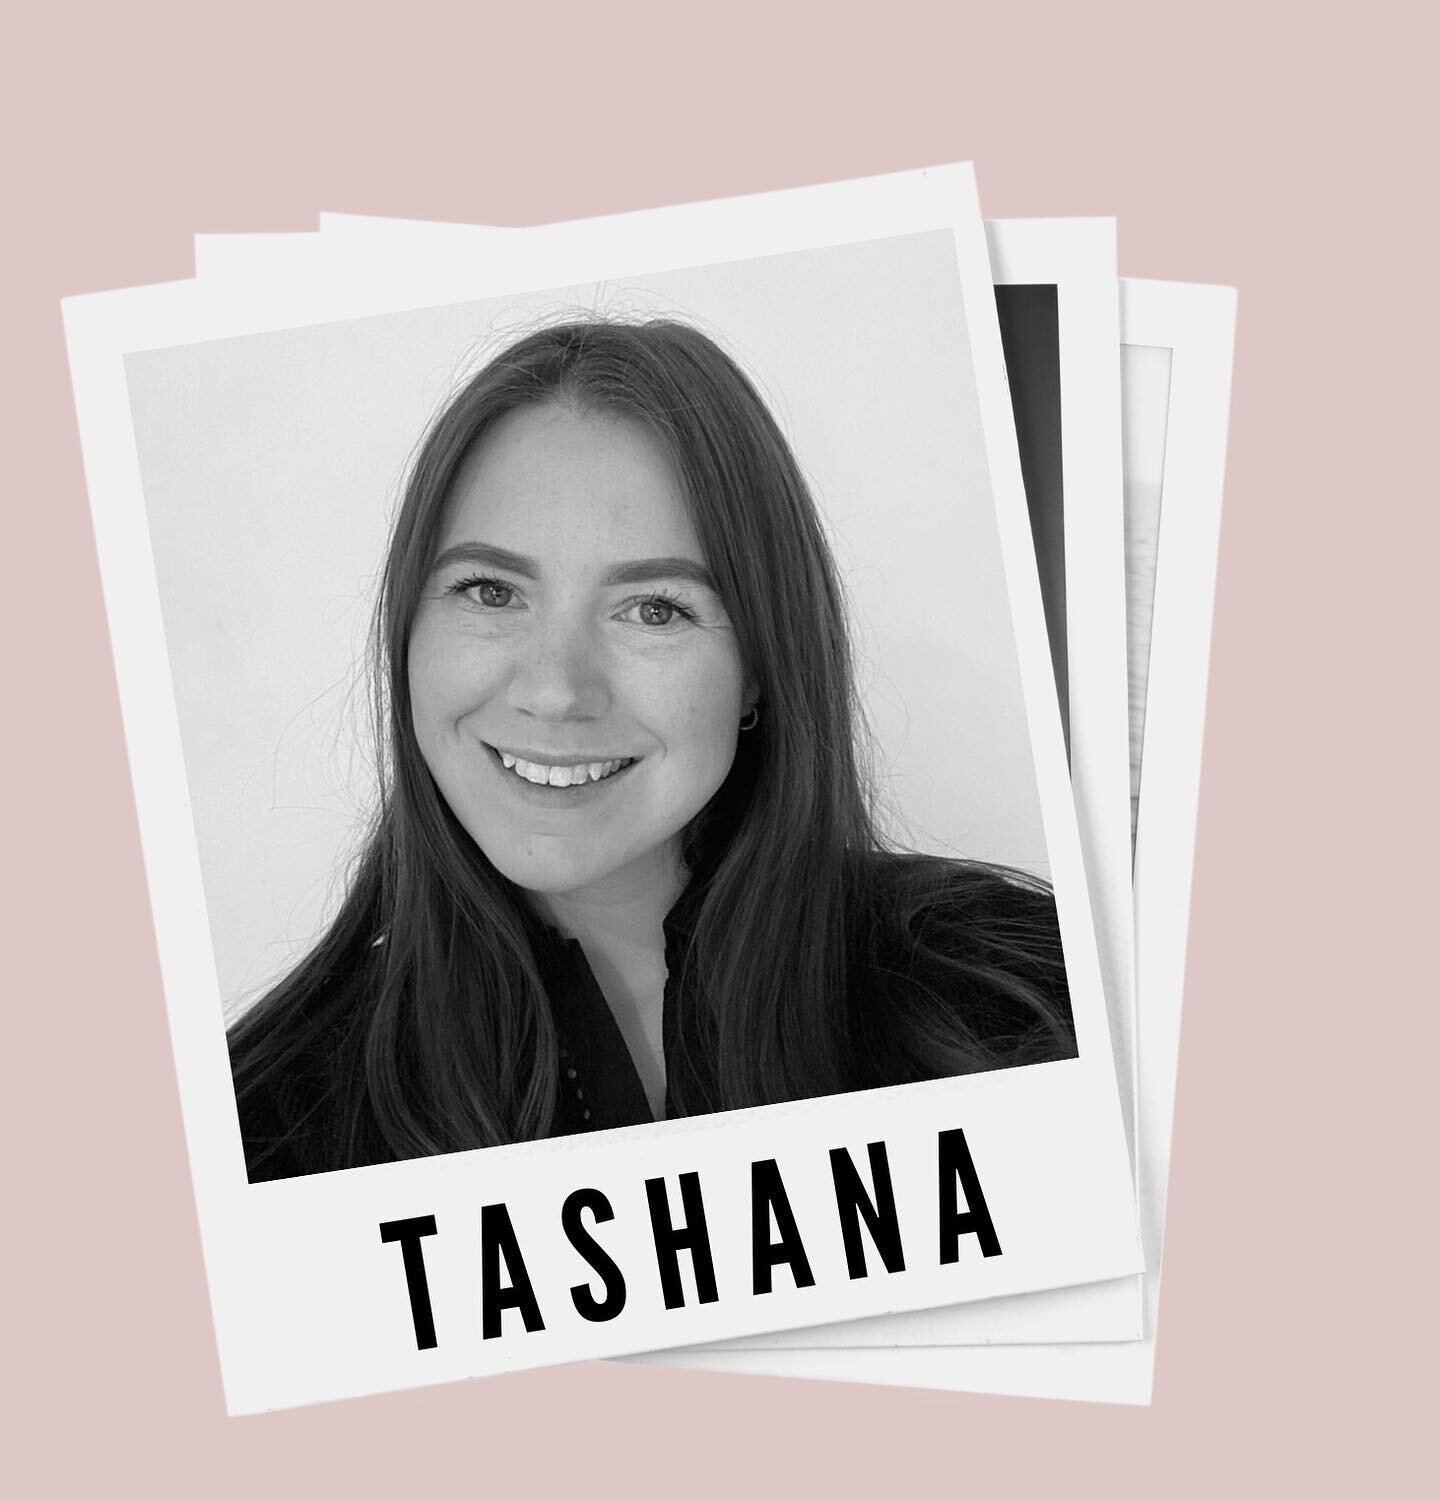 ✨TASHANA✨ 

Tashana joined the salon in 2019, so has been with us for 4 years now and we have absolutely loved having her as part of the team! she joined us after working at Toni &amp; Guy for 13 years, whilst working there she completed her 6 week i